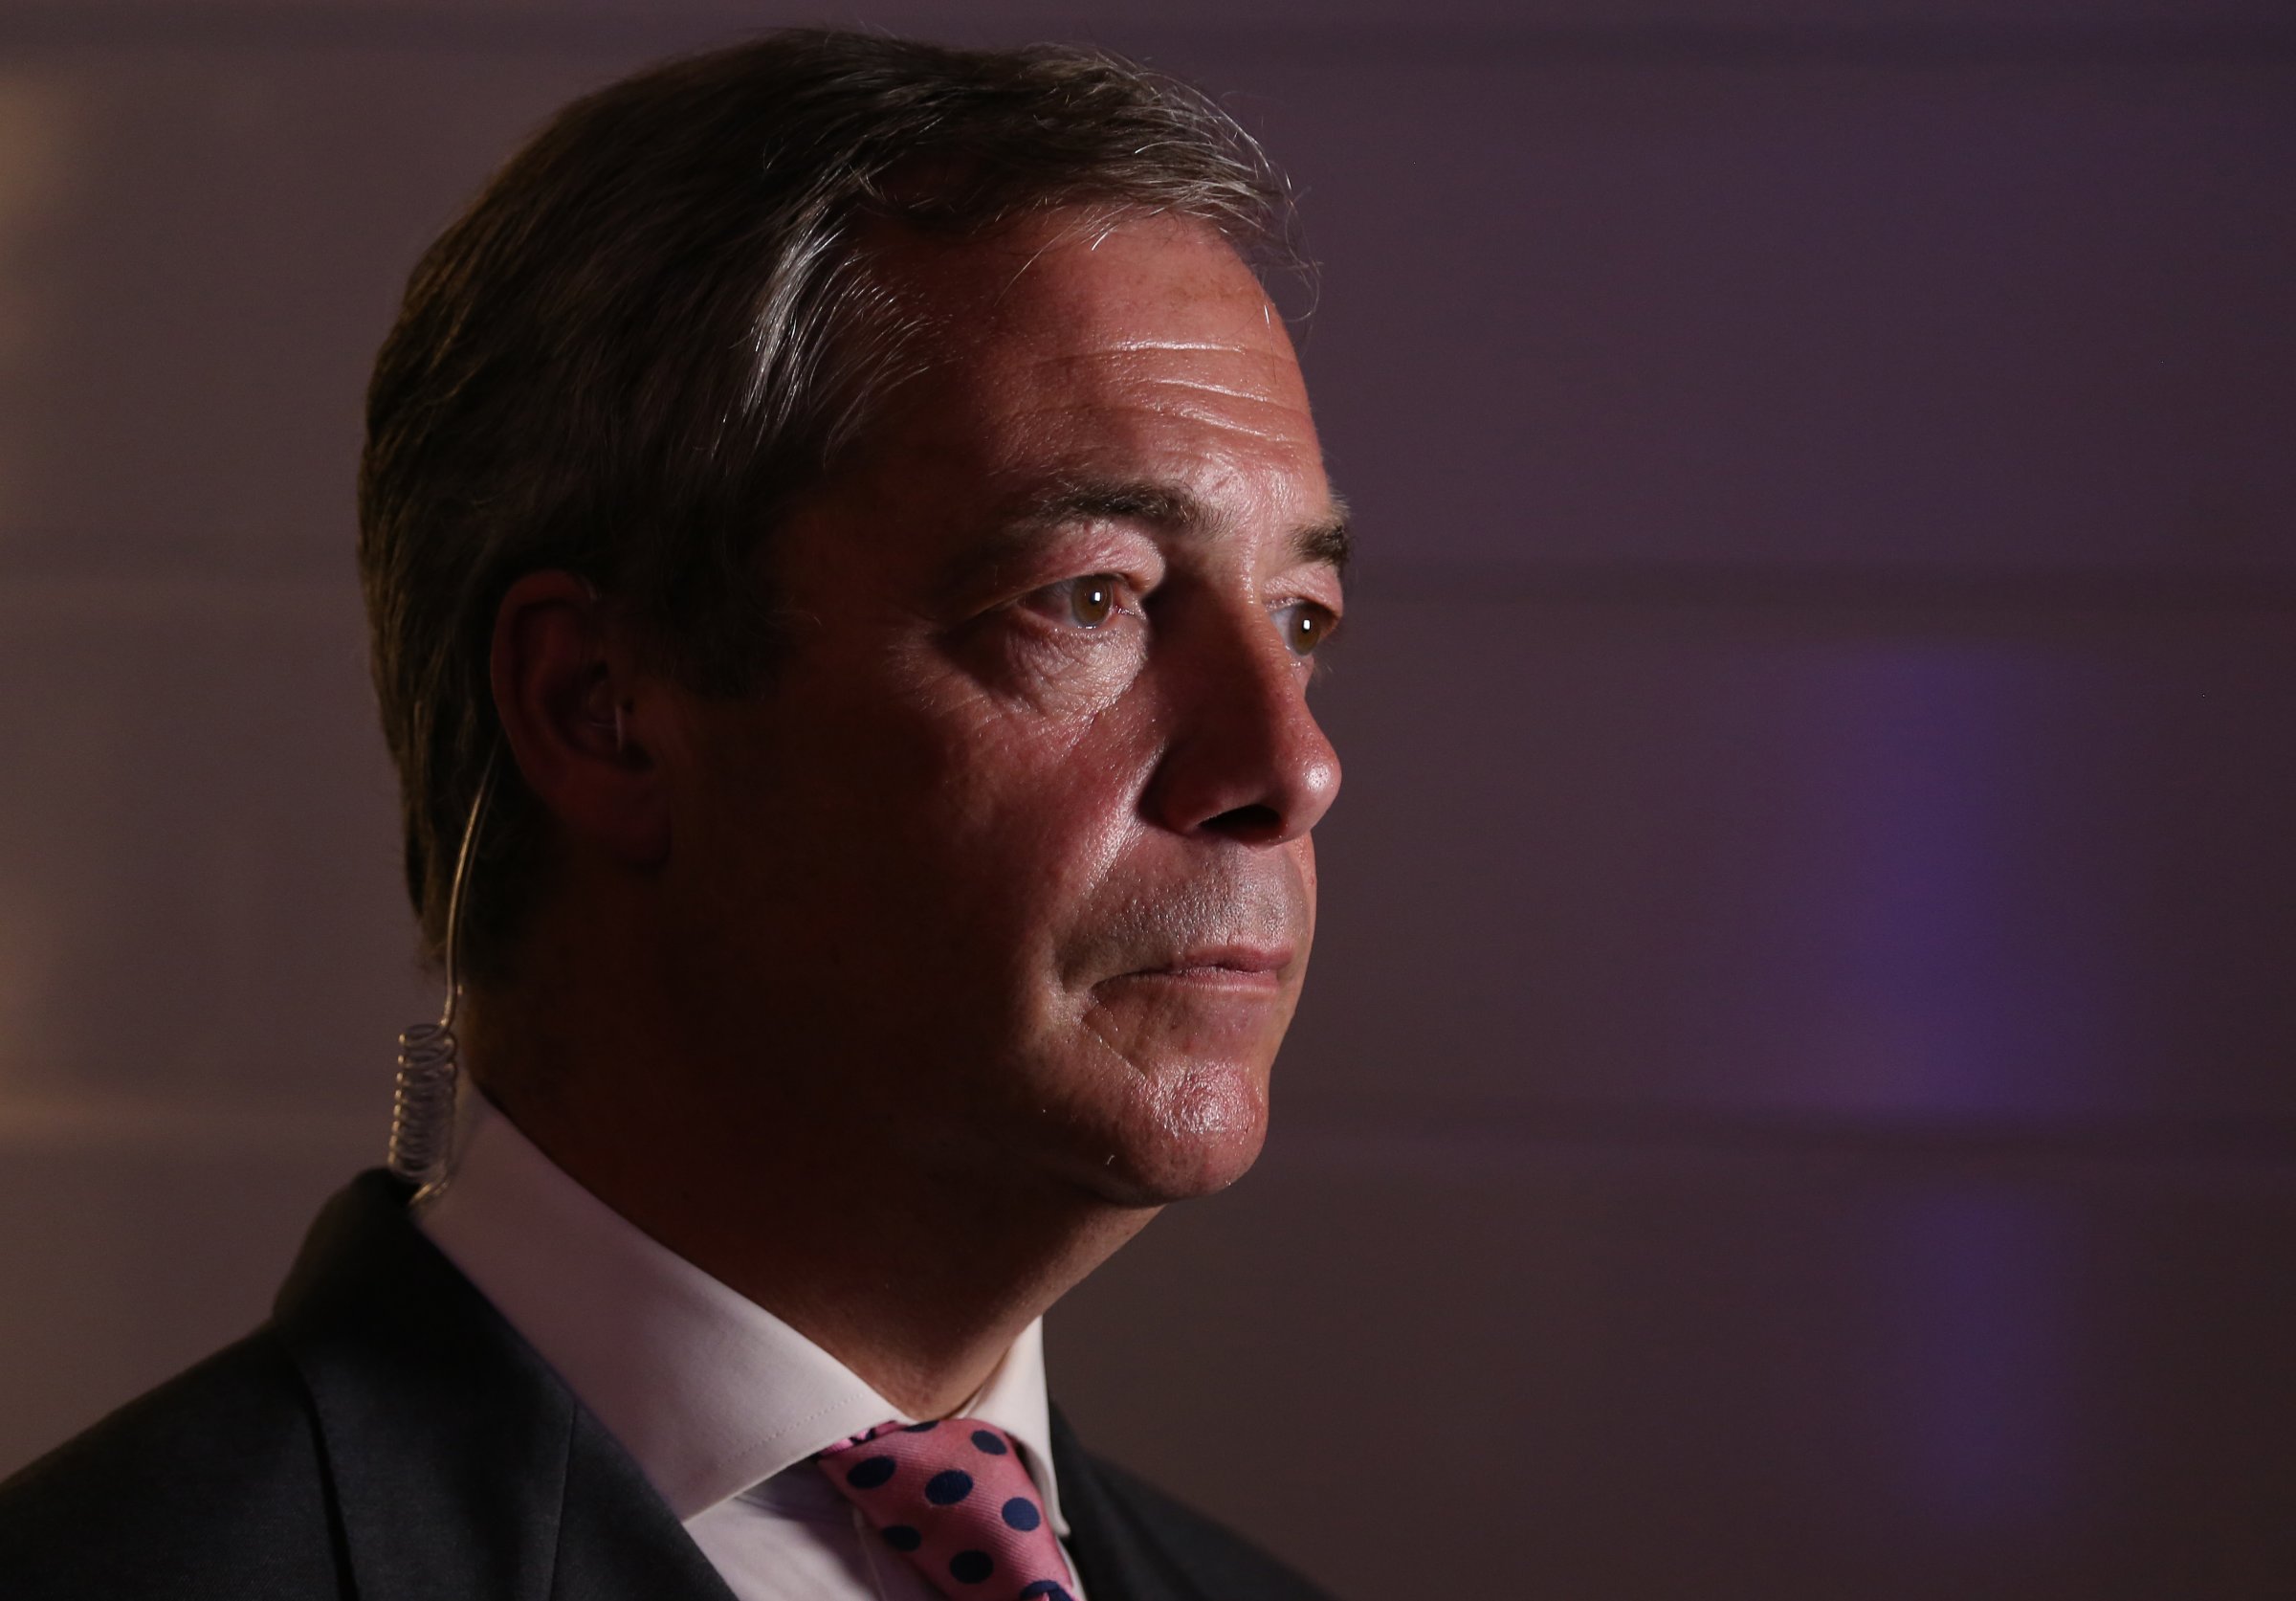 Nigel Farage during an interview in London on June 23 2016.